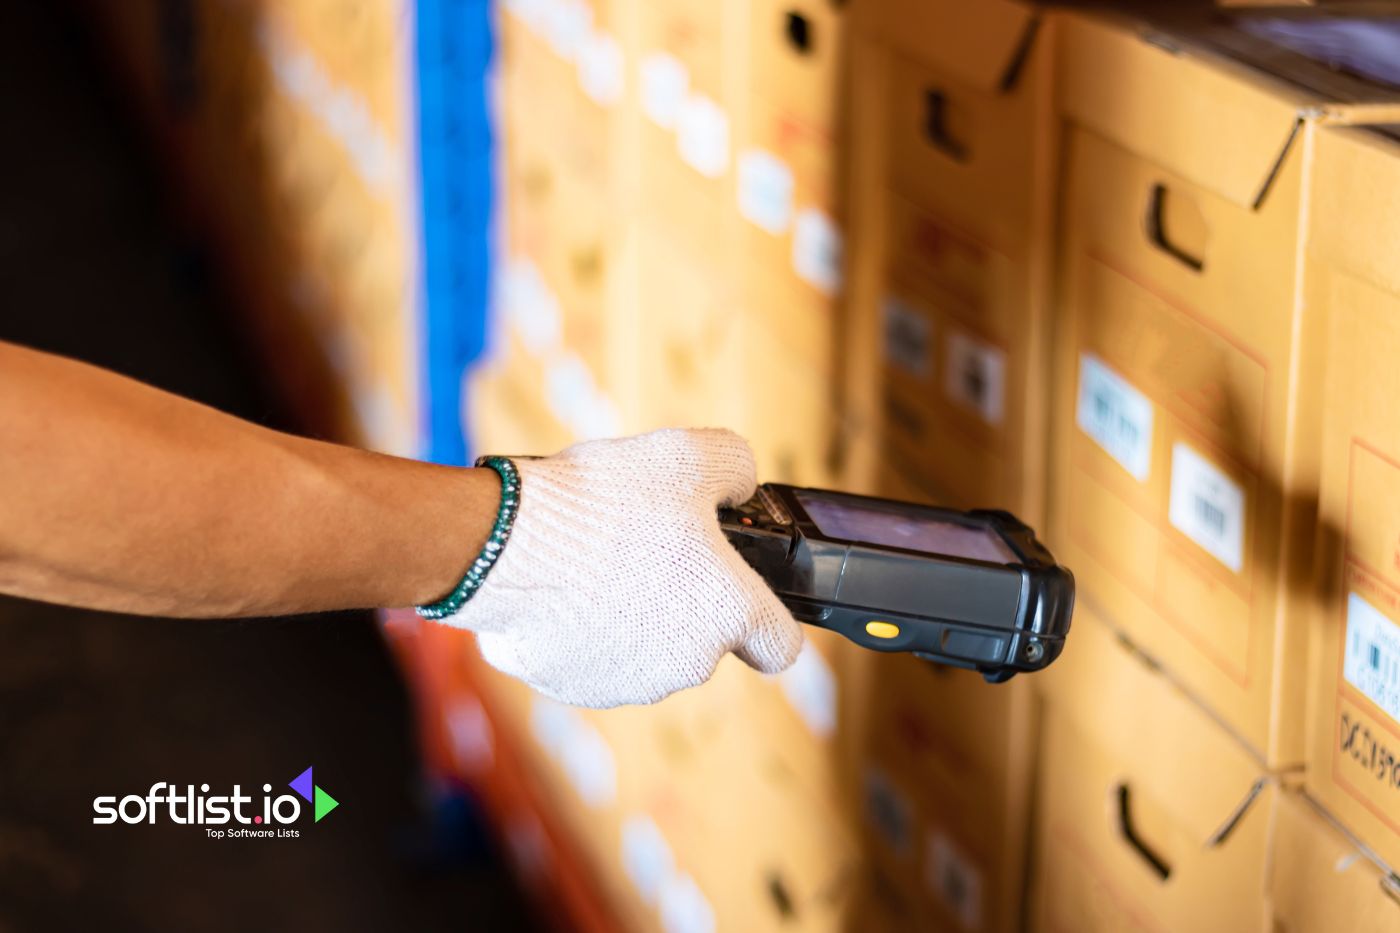 Worker scanning warehouse boxes with handheld device